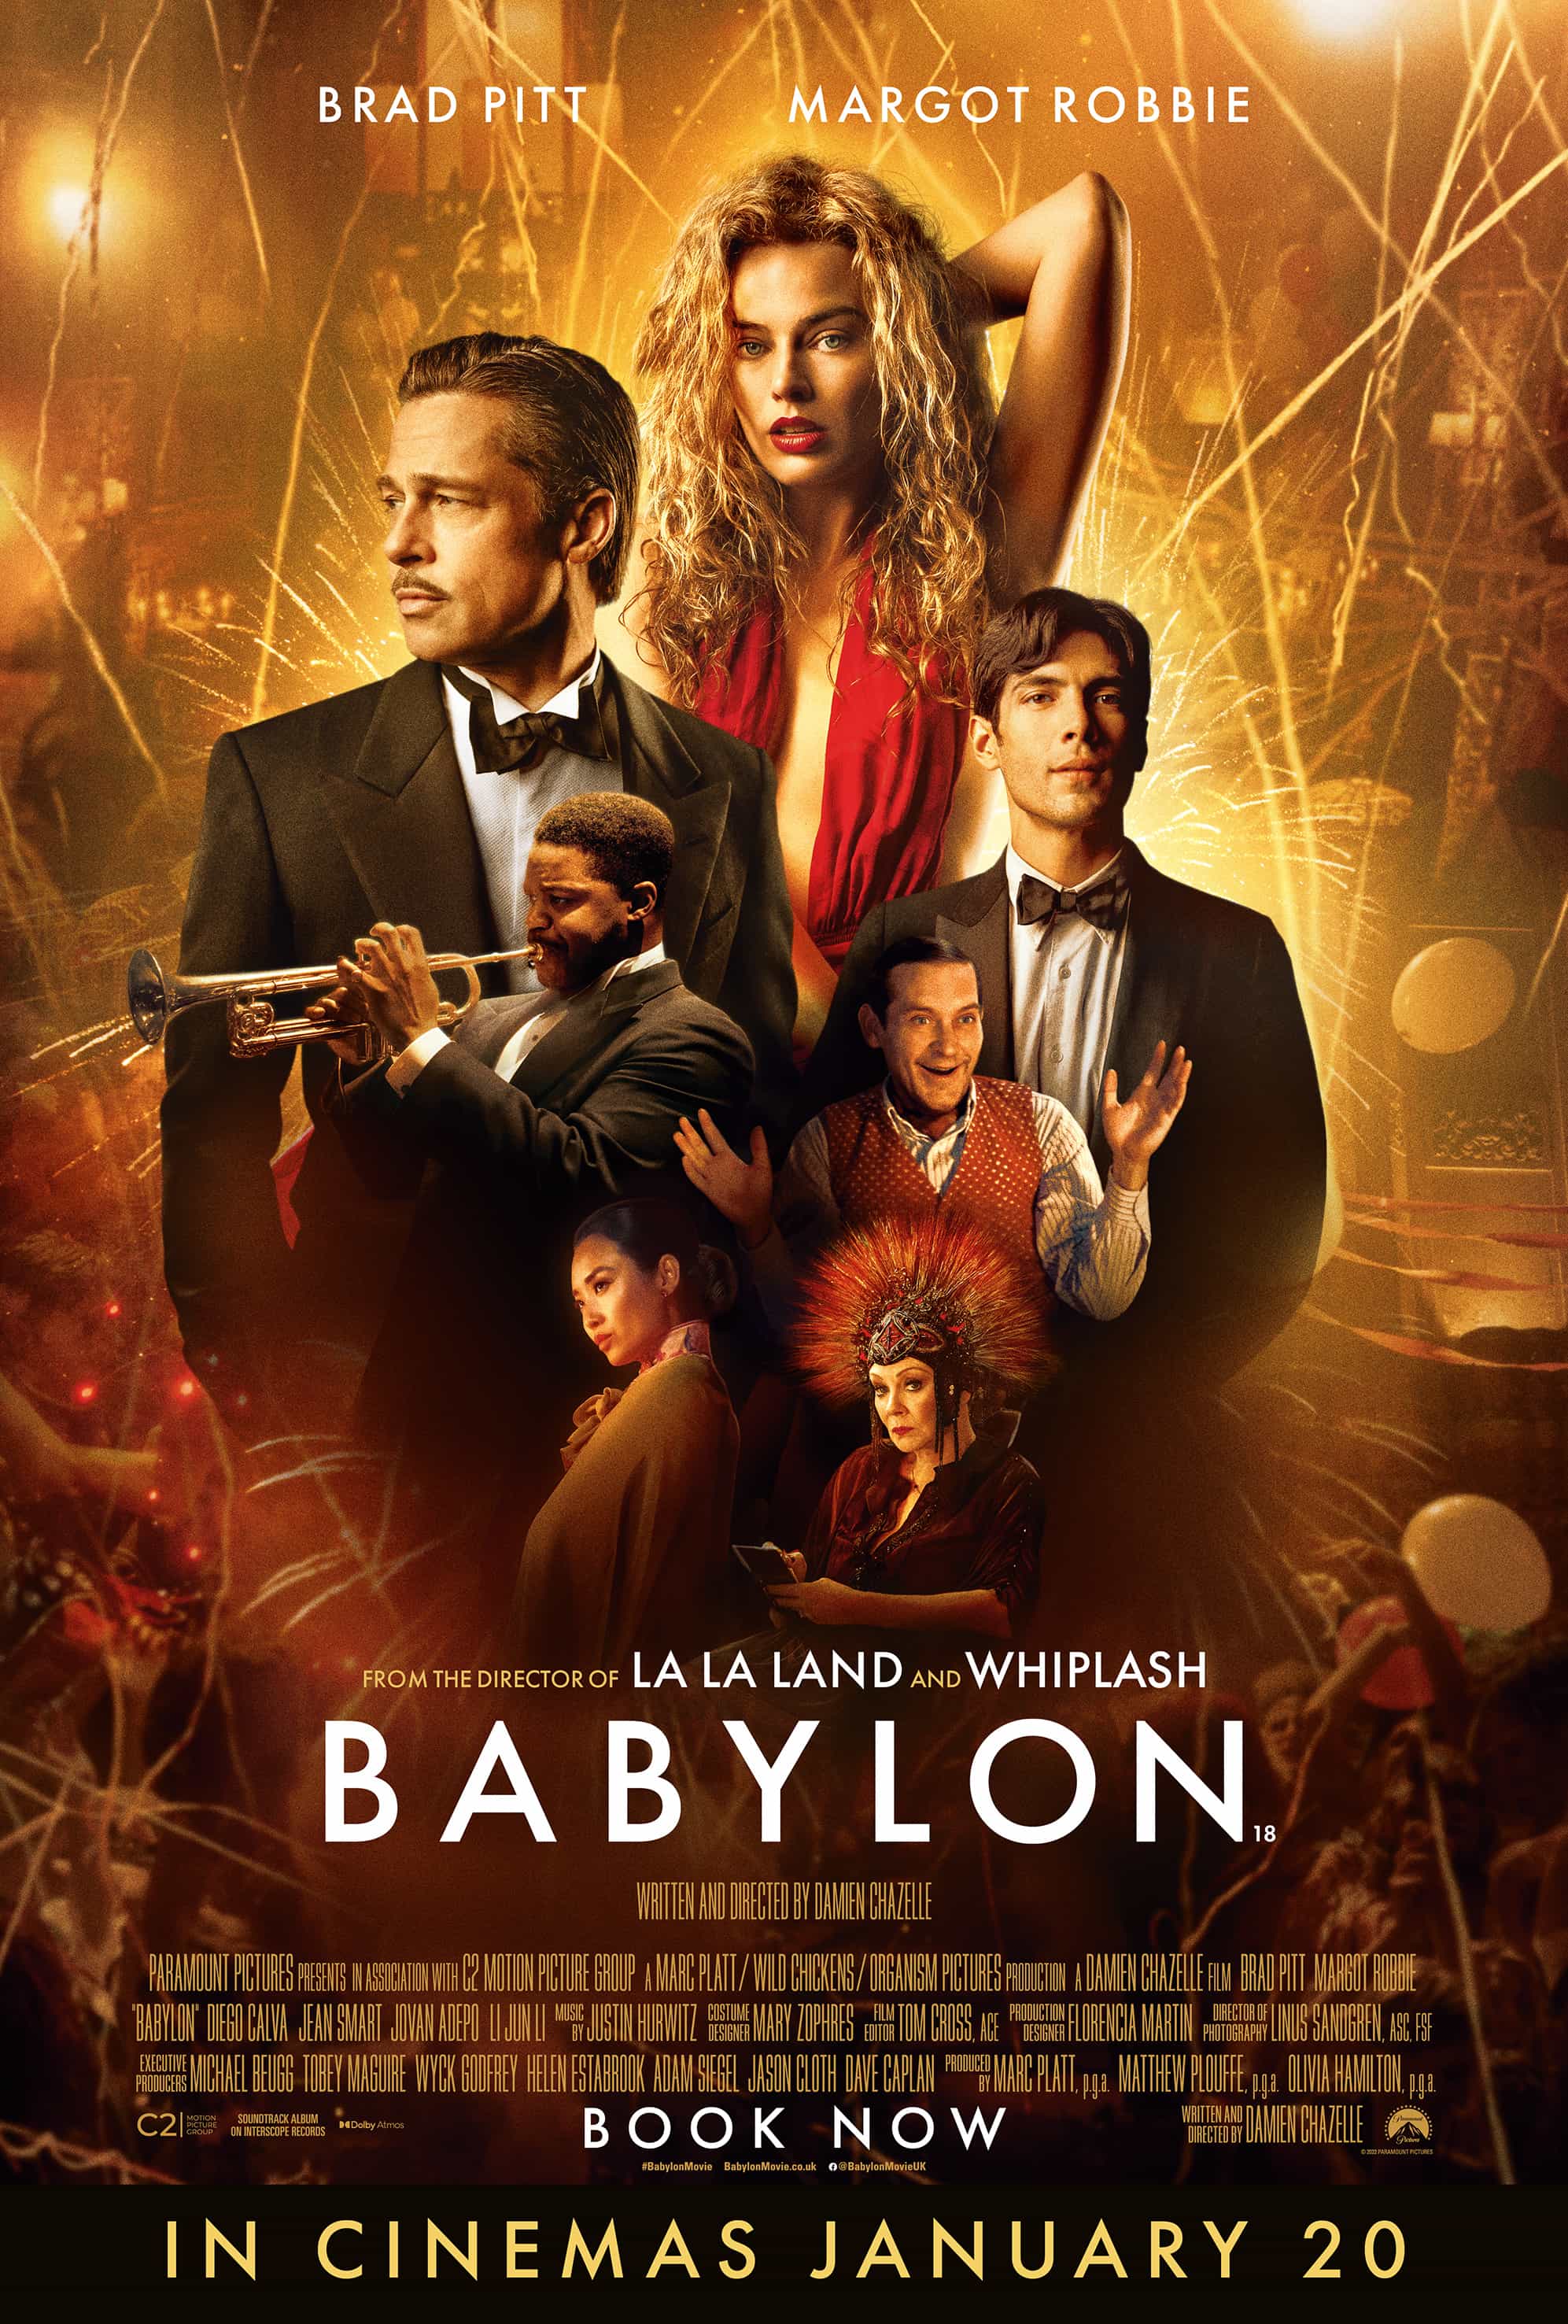 Babylon is given an 18 age rating in the UK for strong sex, nudity, drug misuse